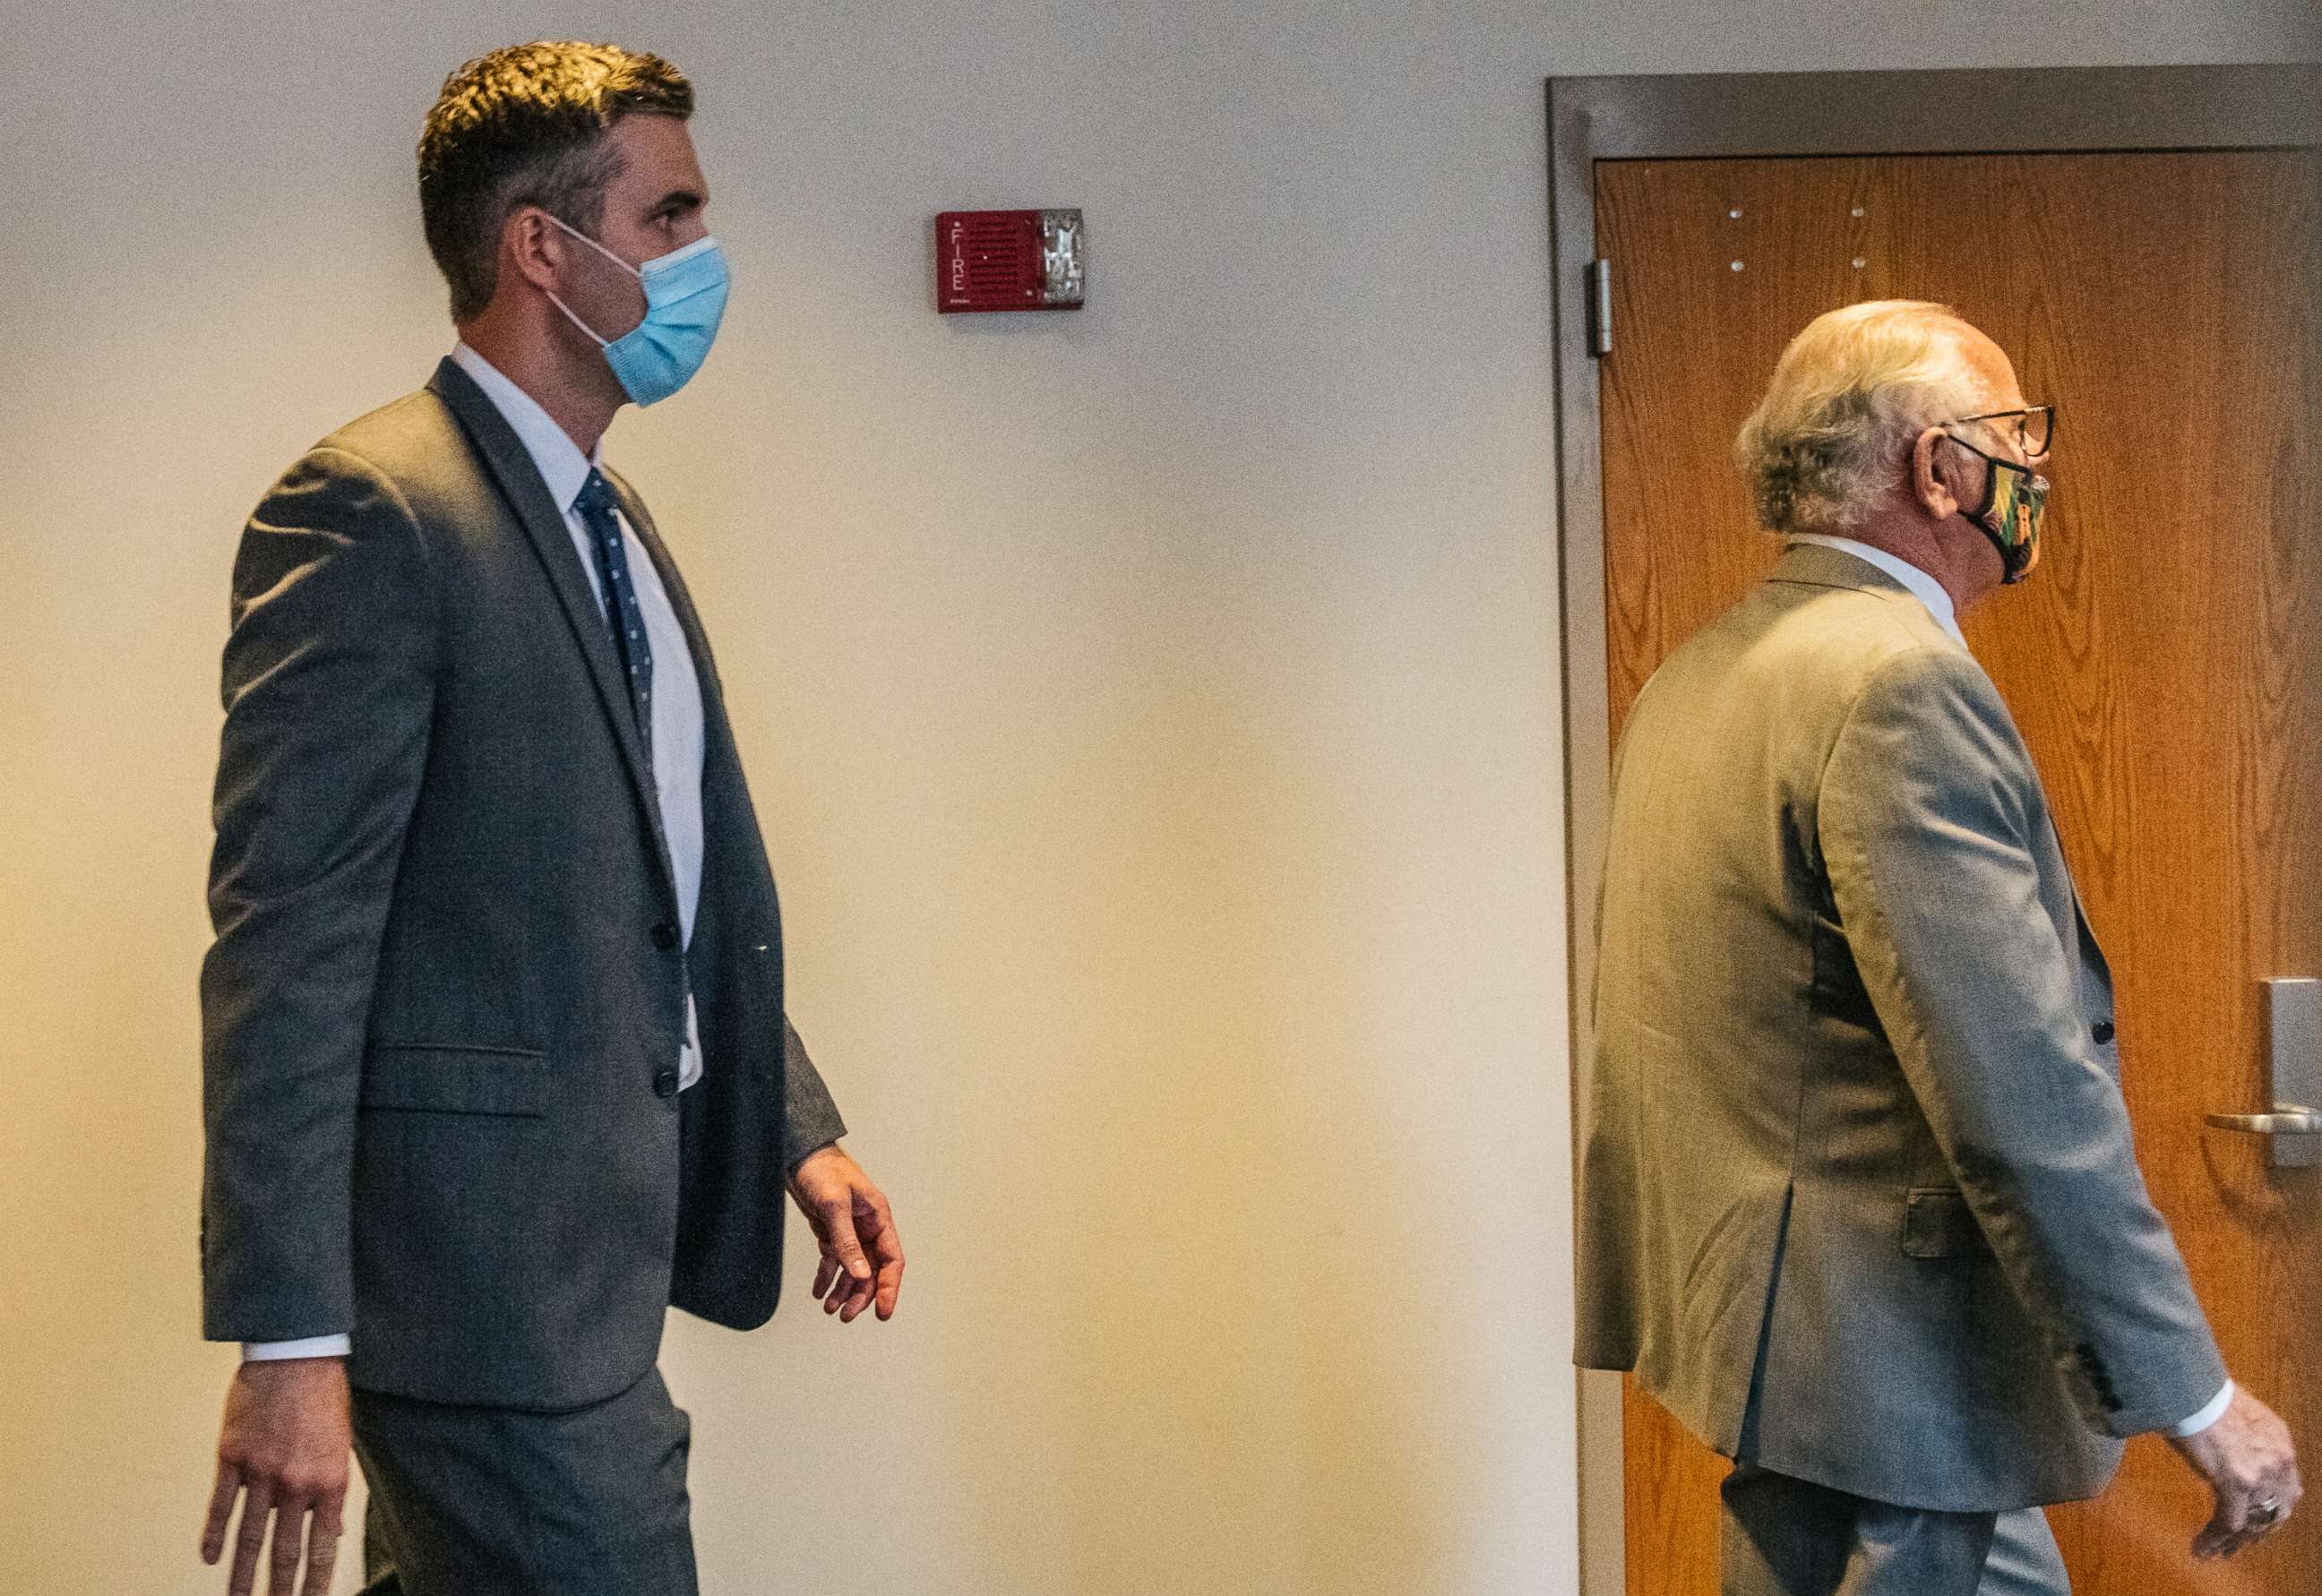 PHOTO: MINNEAPOLIS, MN - JUNE 29: Former Minneapolis Police officer Thomas Lane (L) and his attorney Earl Gray leave the Hennepin County Public Safety Facility after his second courthouse appearance on June 29, 2020 in Minneapolis, Minnesota. 